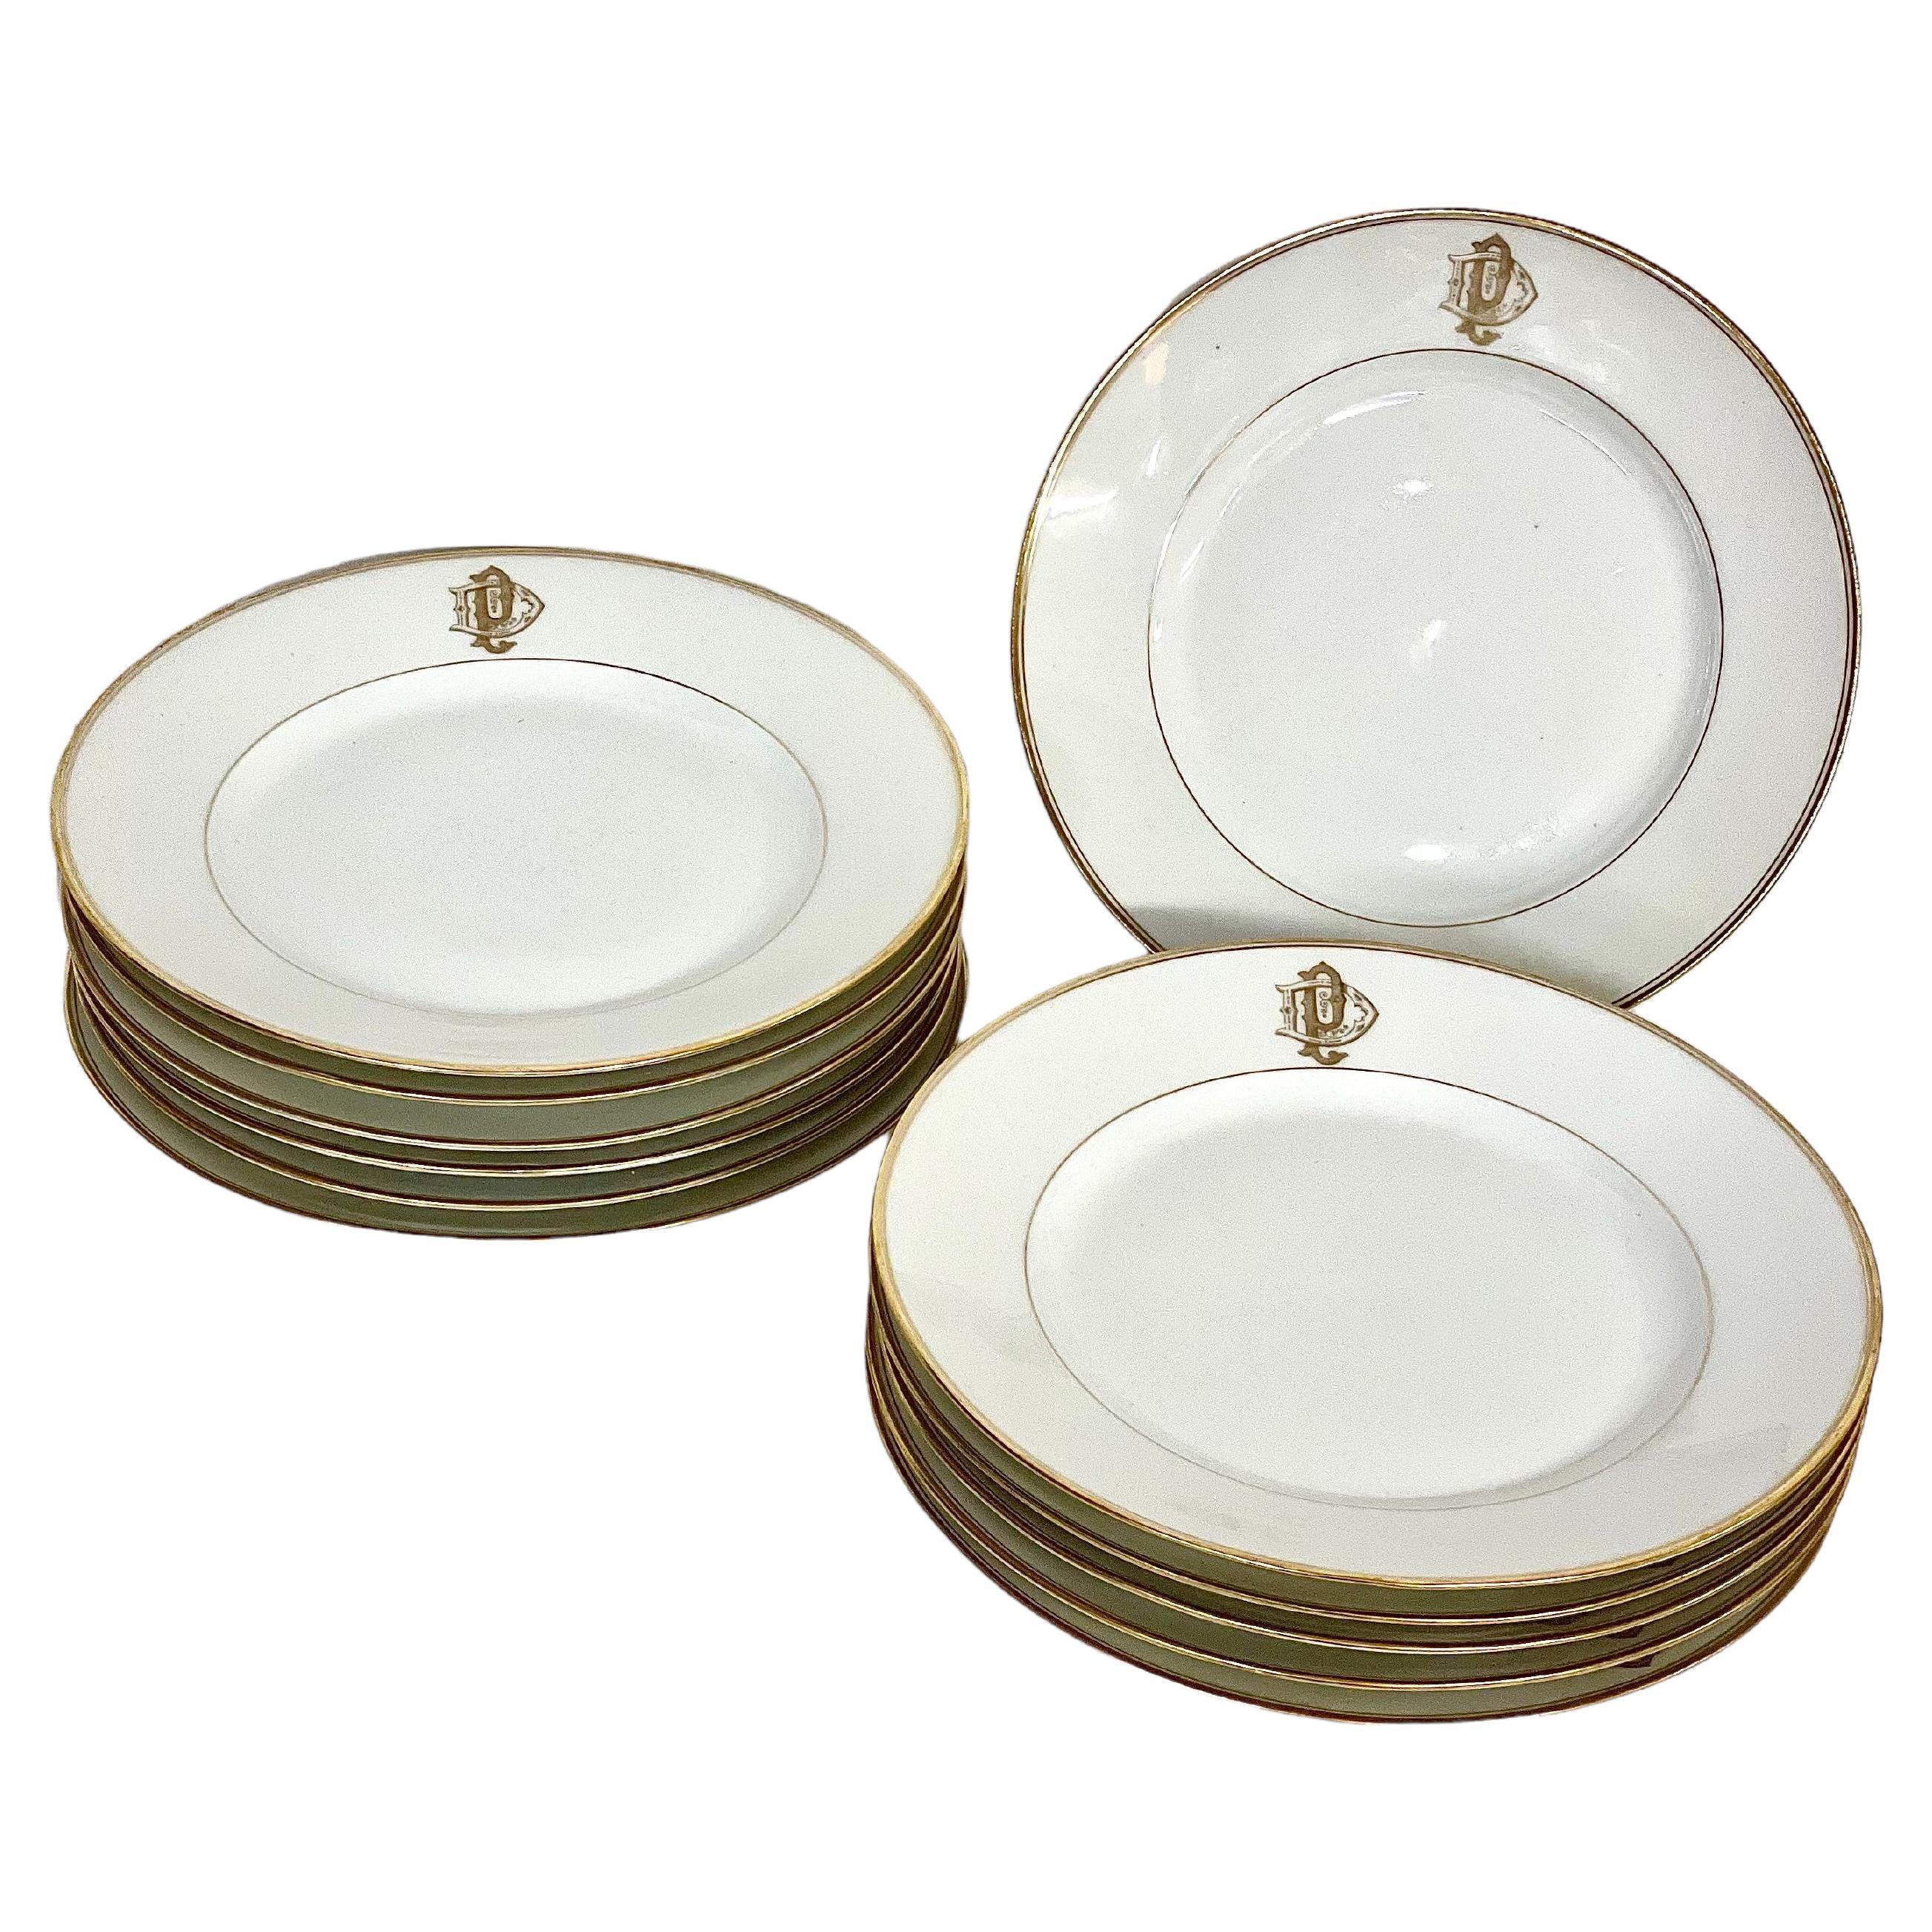 Limoges Porcelain Set of 12 Dinner Plates with Gilt Edges and Monogramme